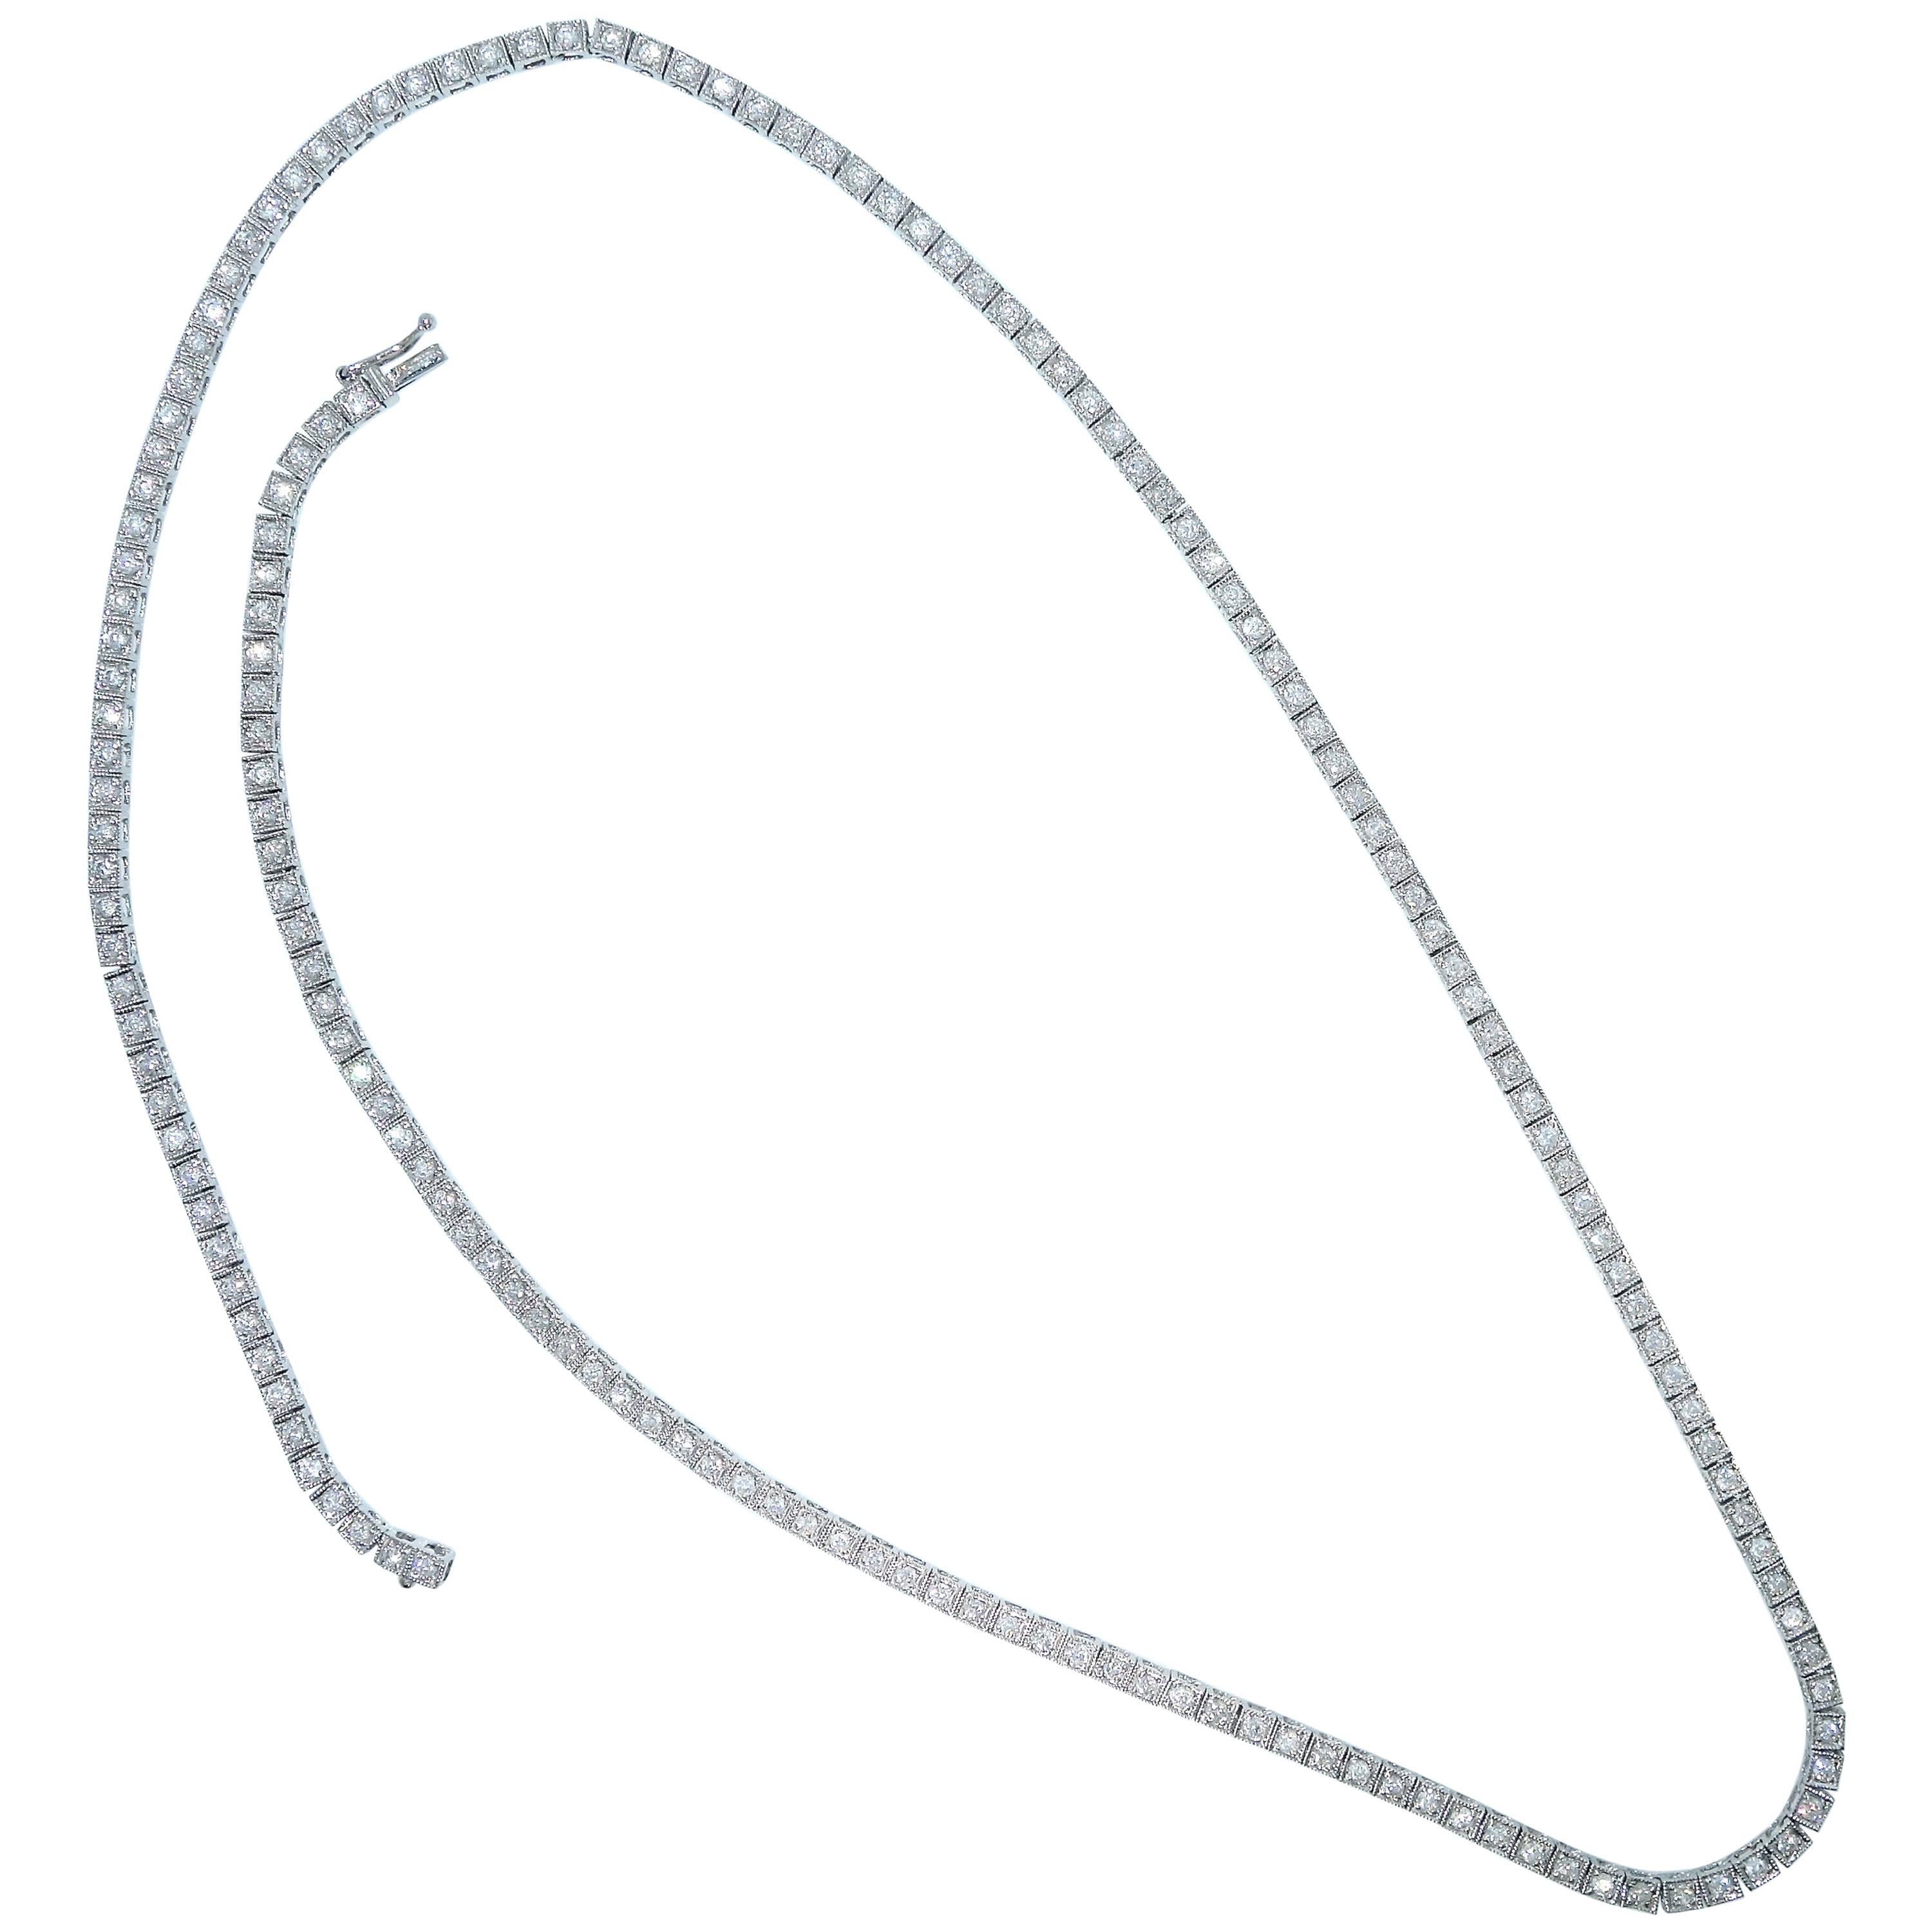  Diamond and White Gold Necklace